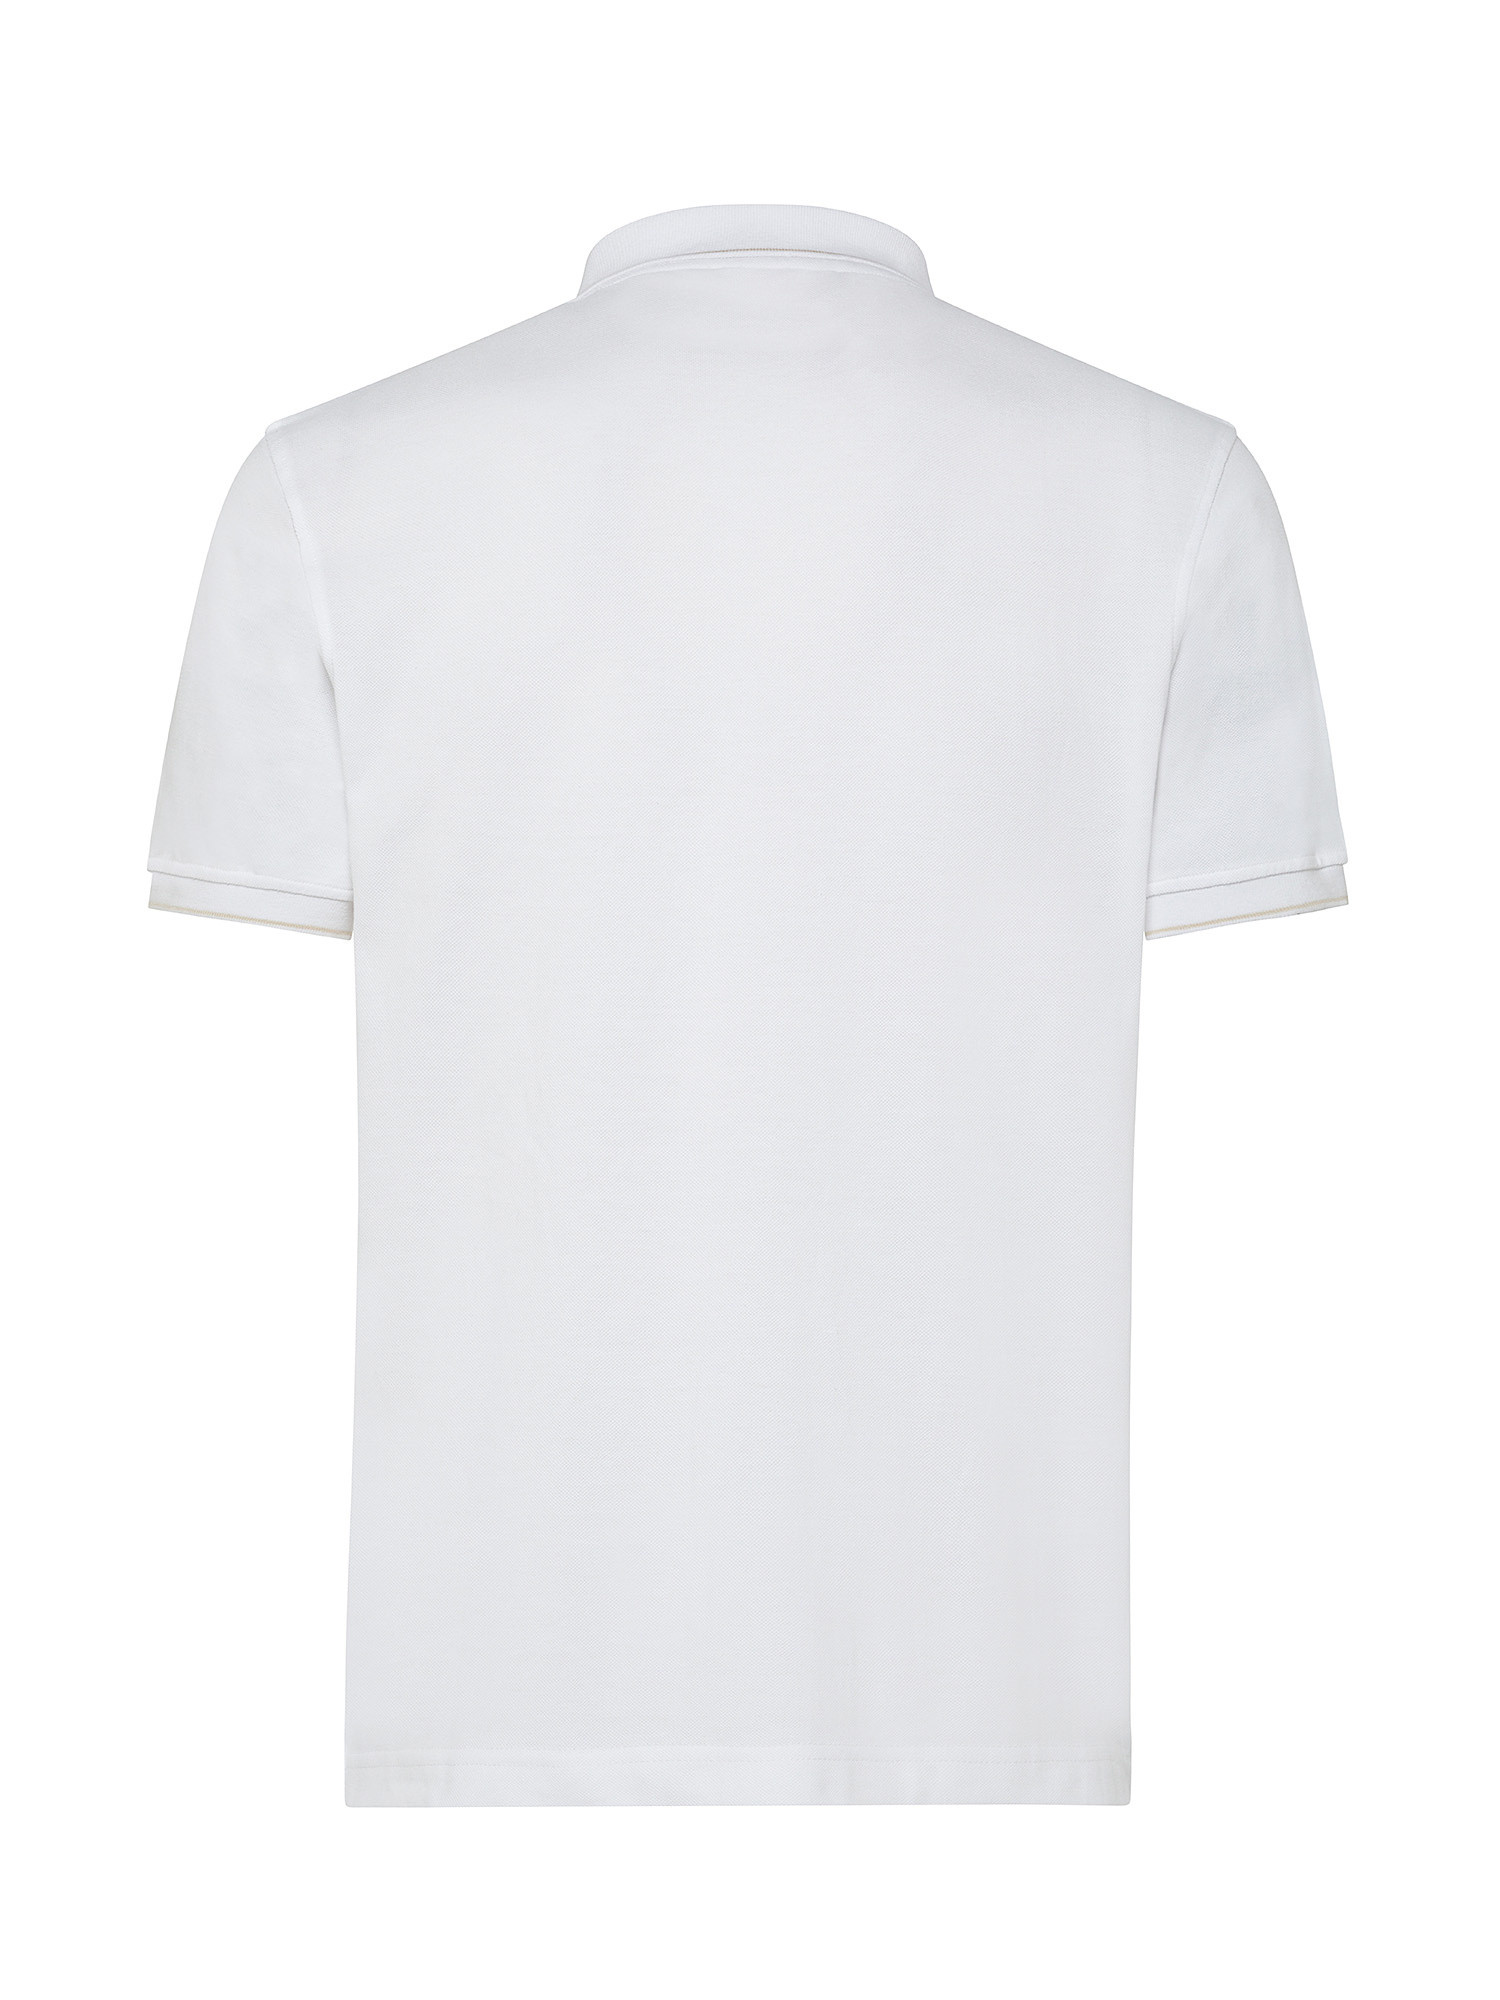 Ciesse Piumini - Piff polo shirt in cotton with logo, White, large image number 1